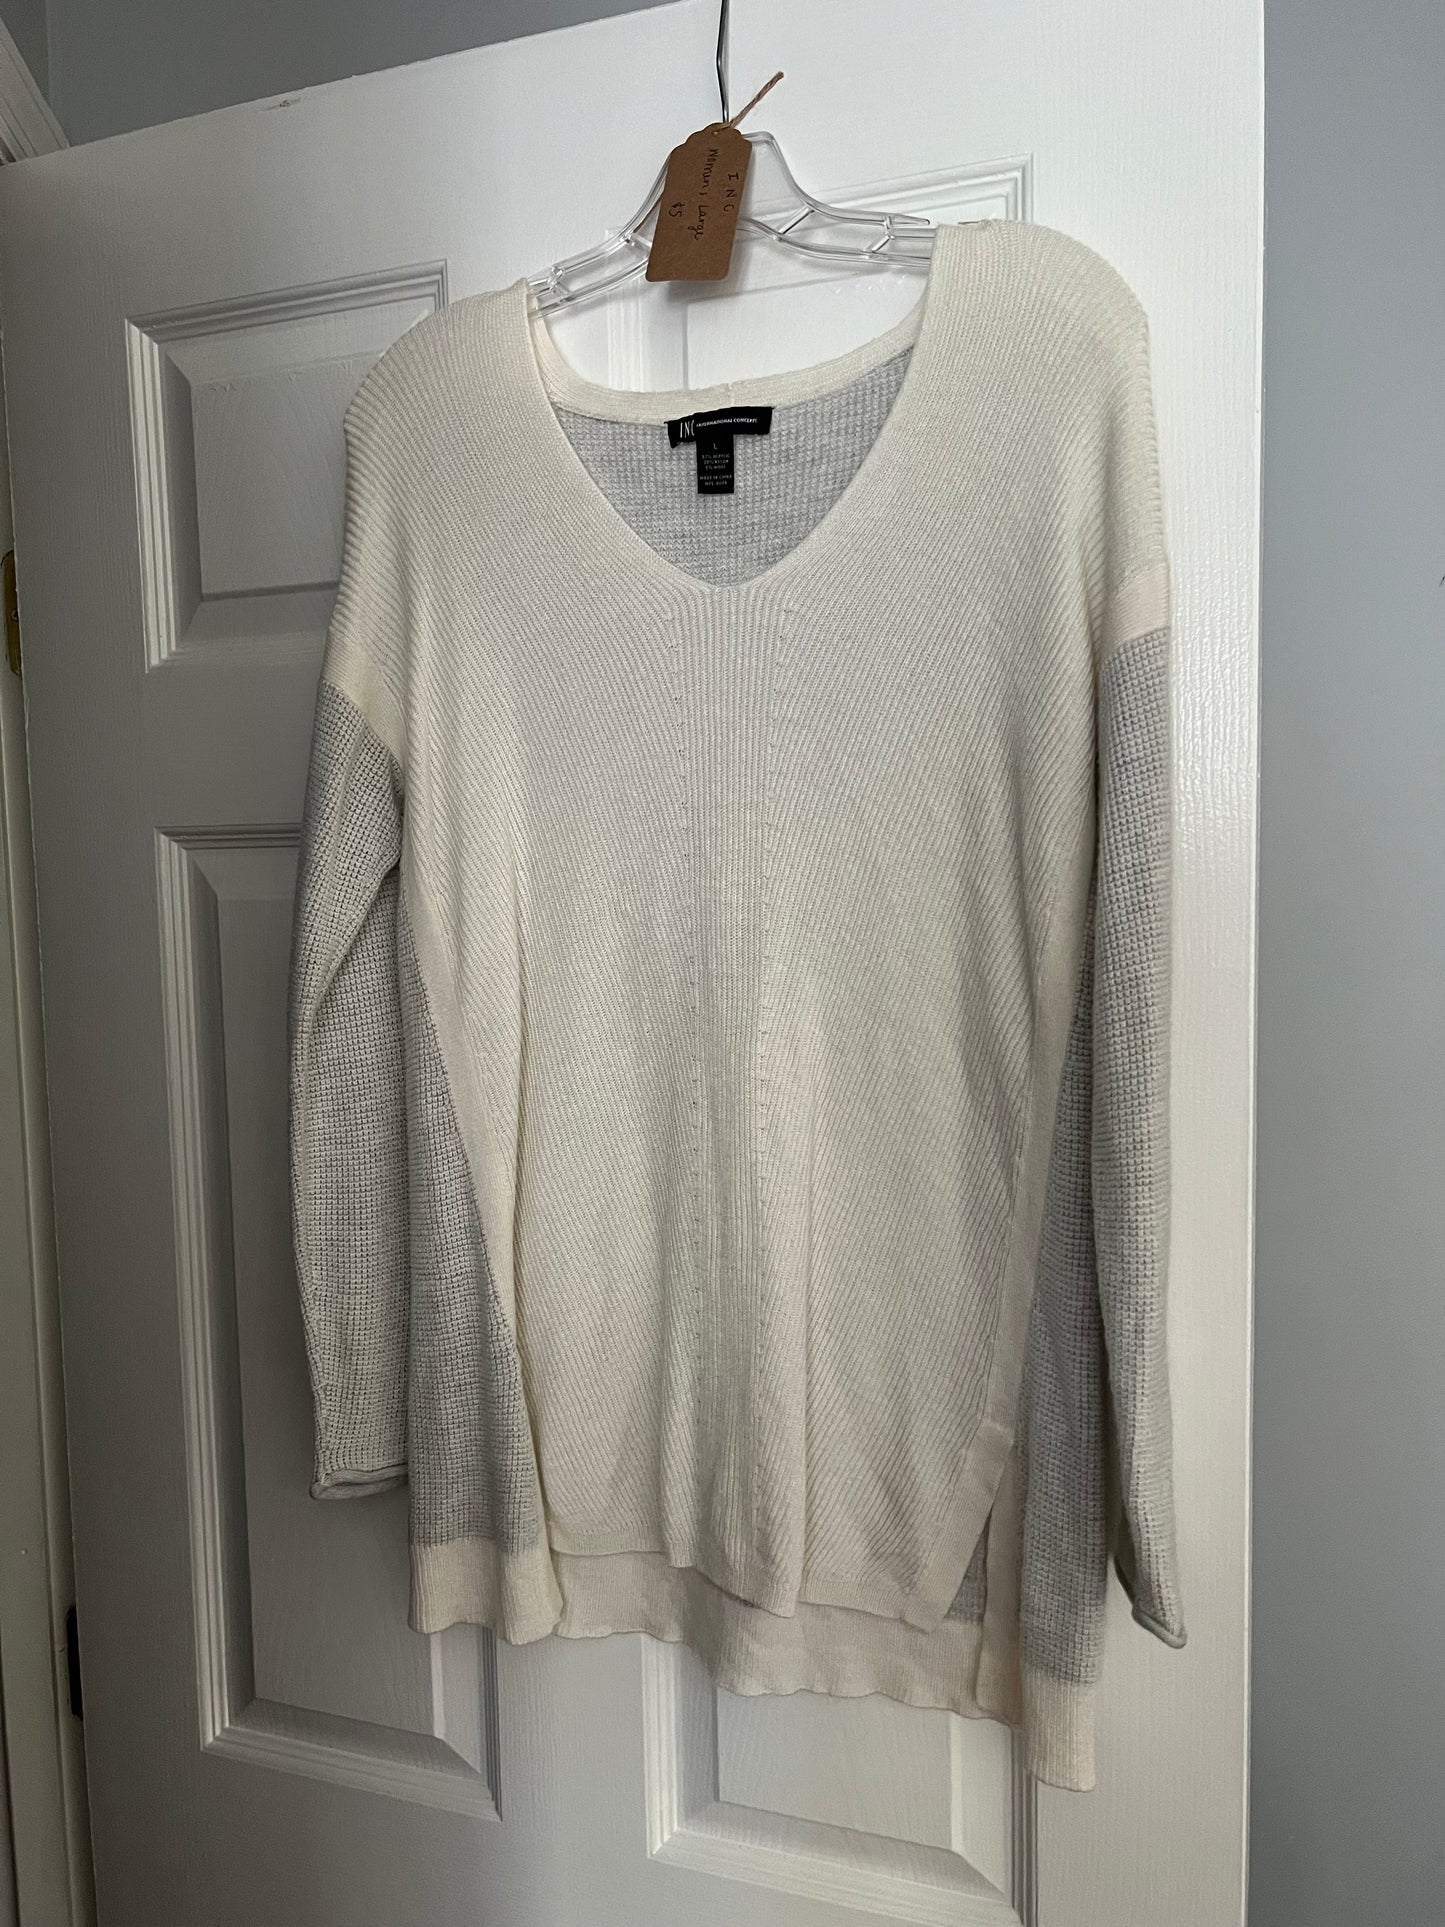 **REDUCED** INC Women's Ivory Sweater with Light Gray Sleeves Size L